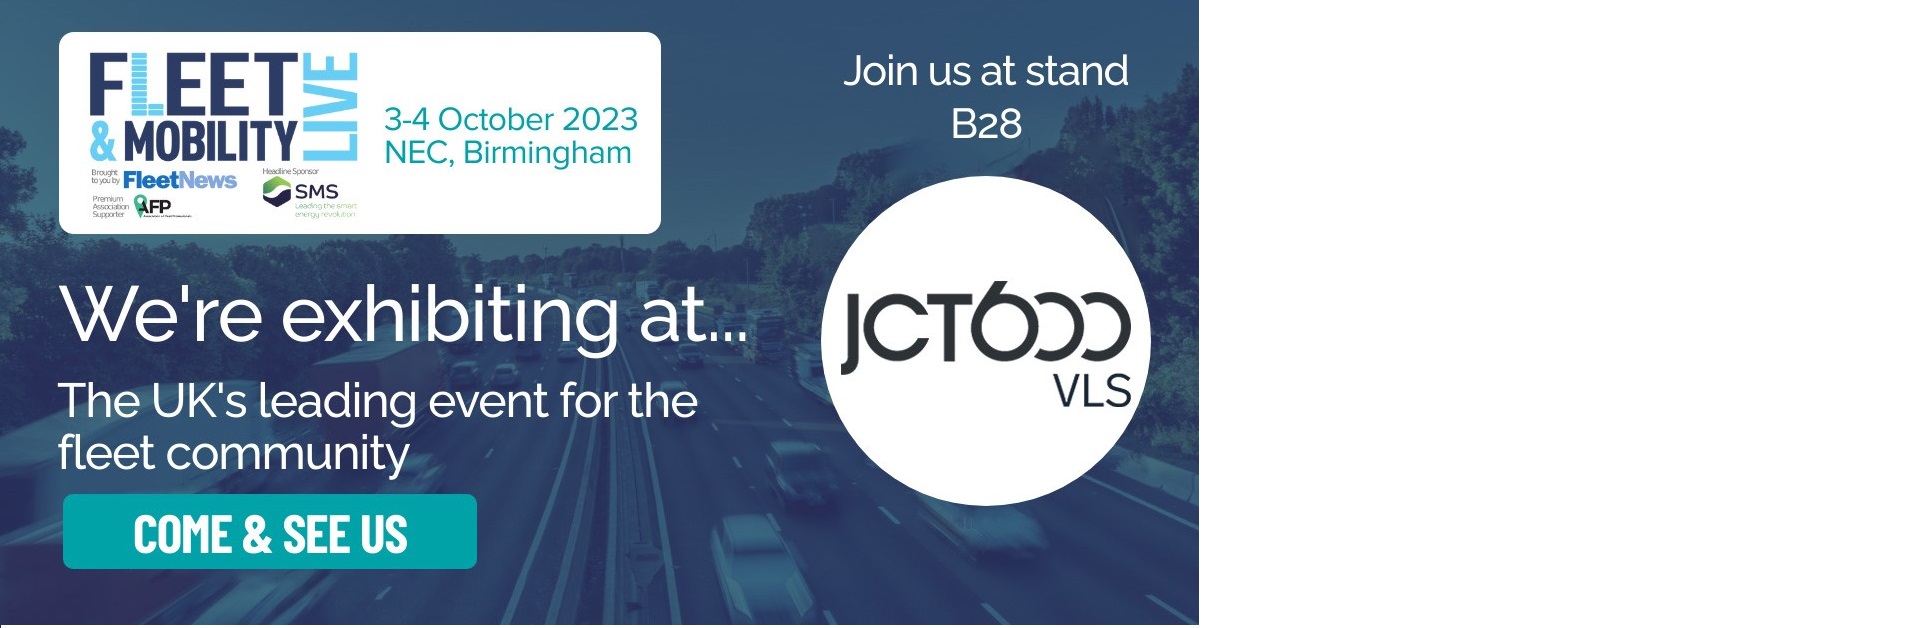 Come and see us at stand B28 of Fleet and Mobility Live - October 3-4 October 2023 at the NEC